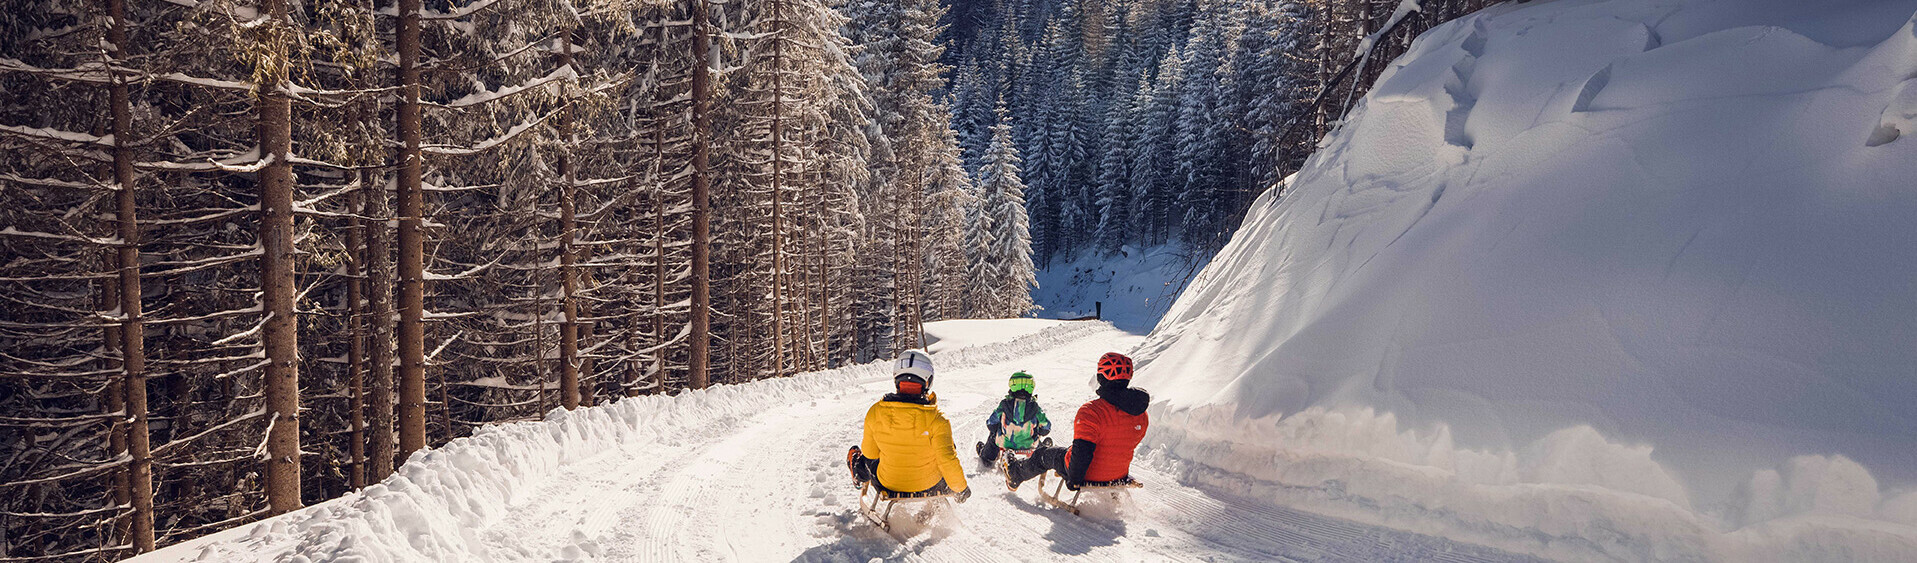 Tobogganing on the Zwölferkopf is a fun outdoor winter pursuit for the whole family.